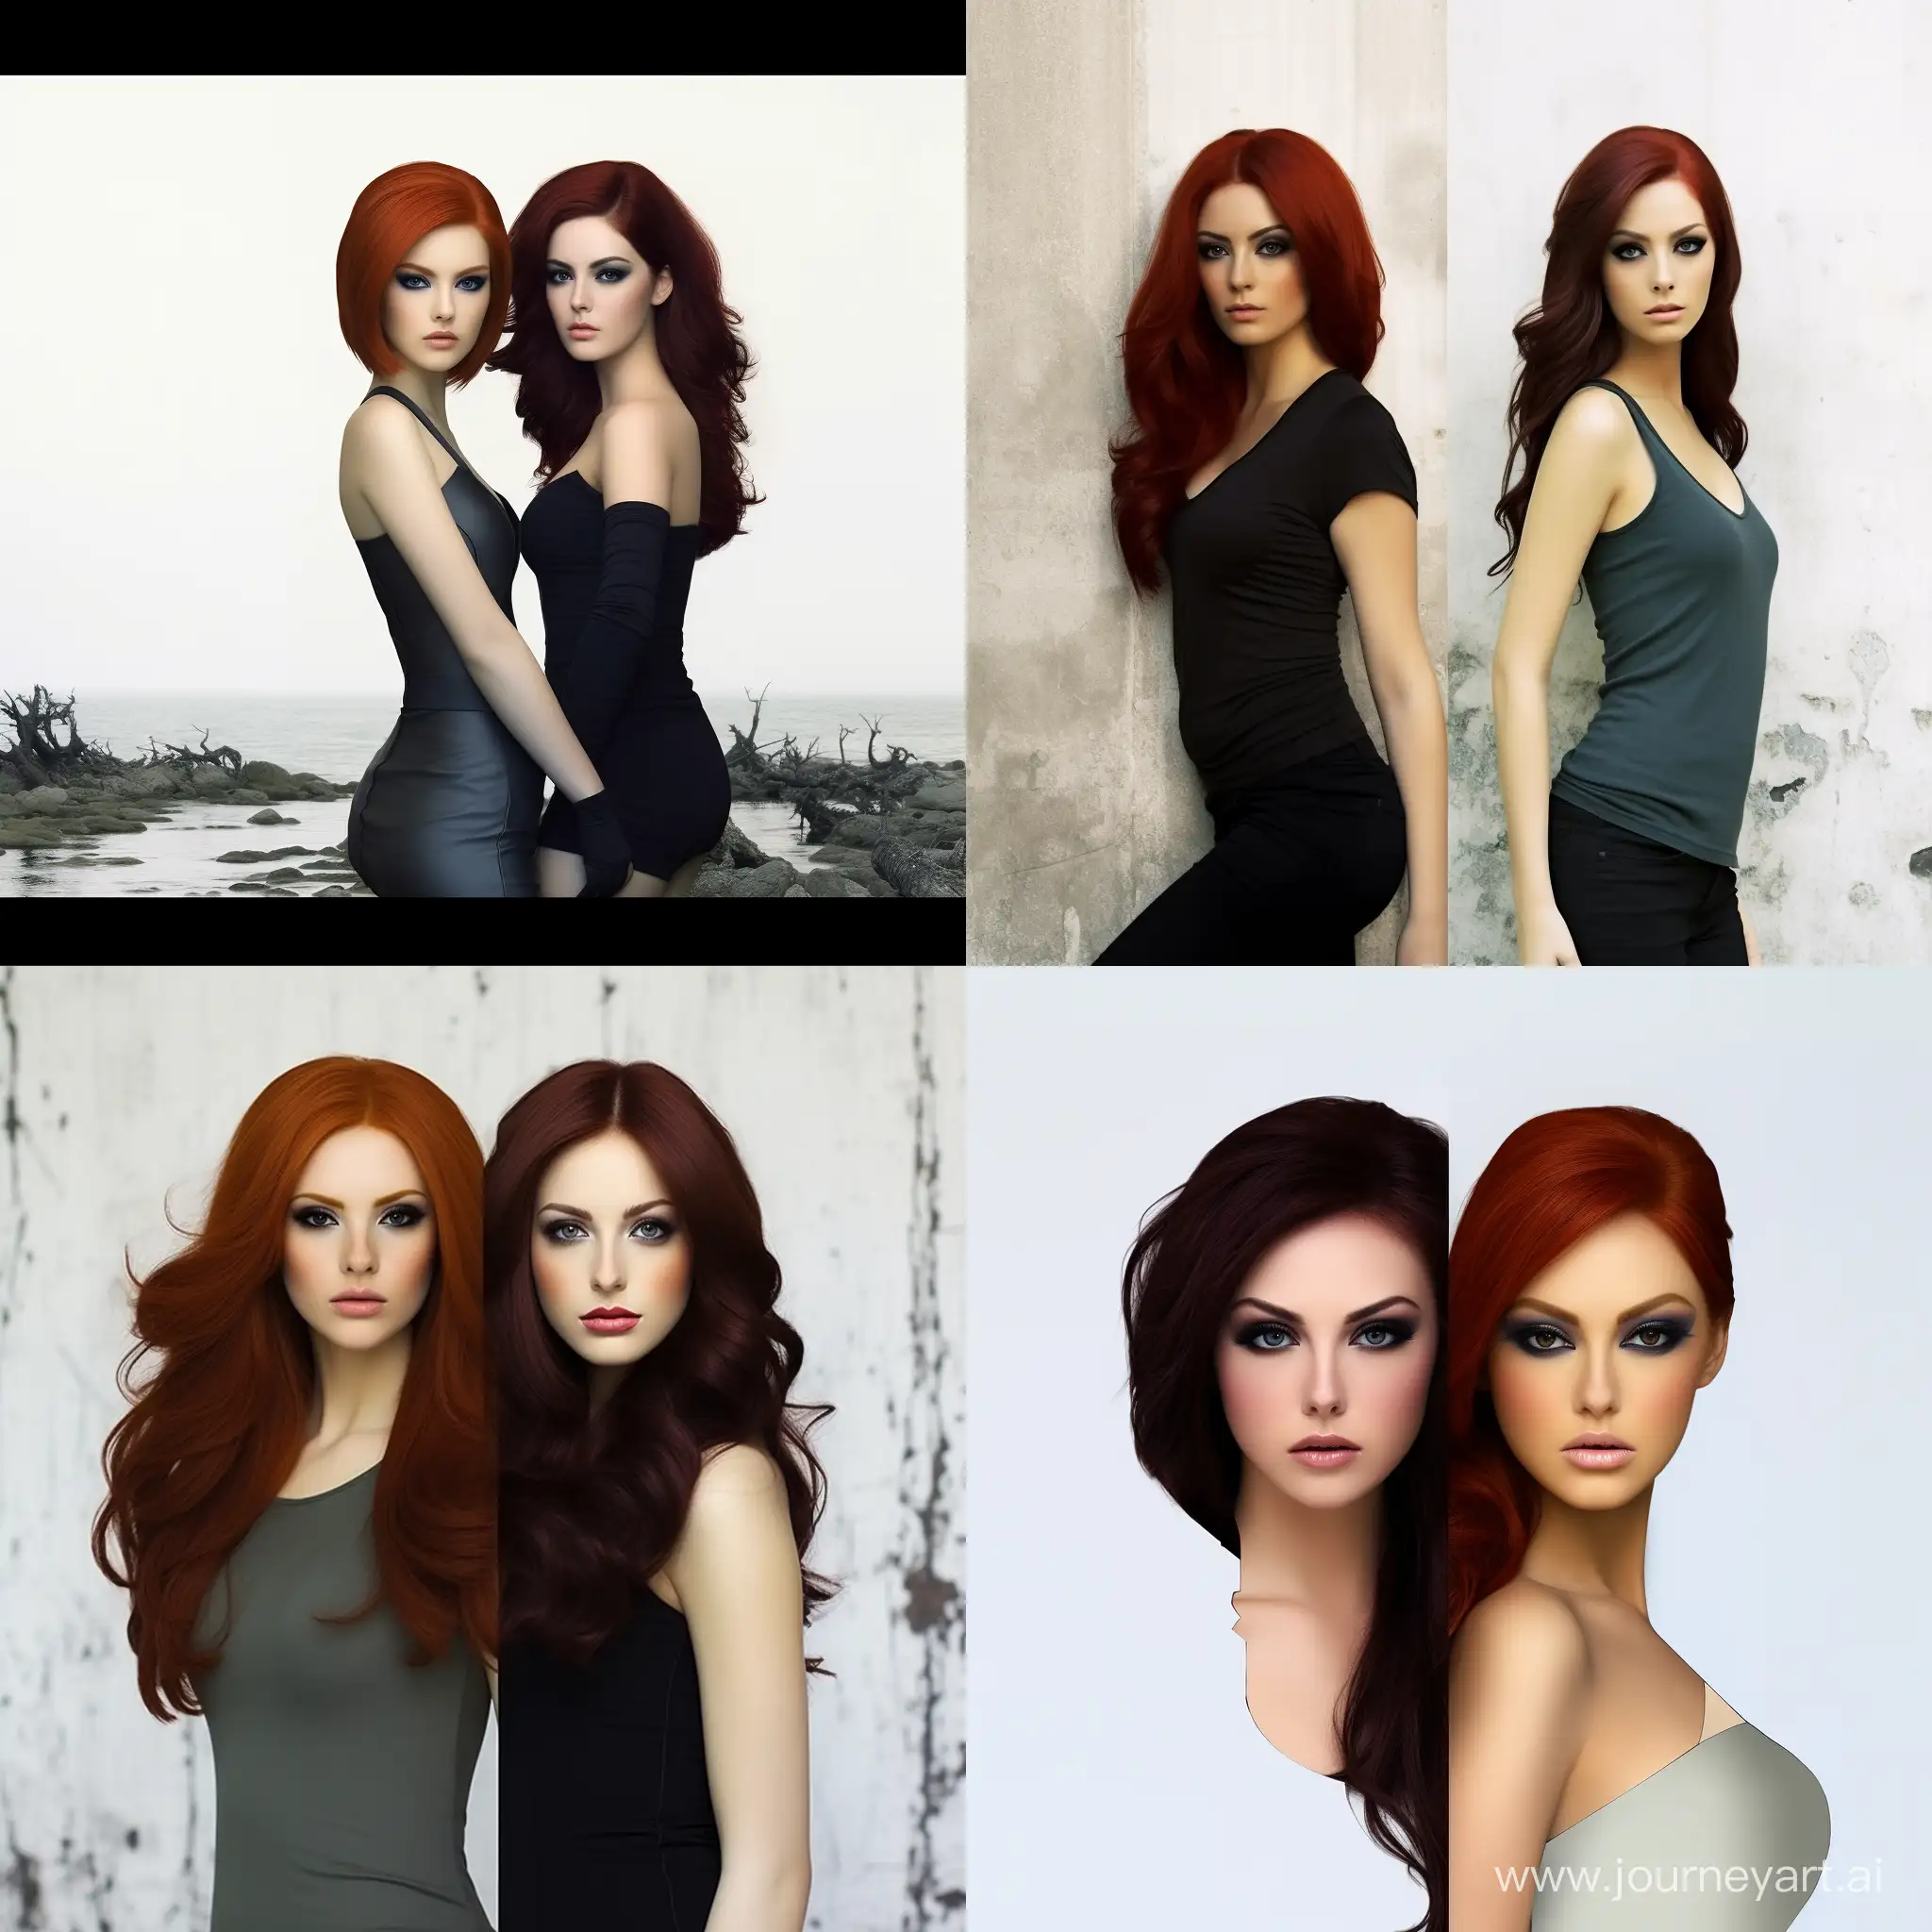 Stylish-Portrait-of-Two-Beautiful-Women-with-Red-and-Black-Hair